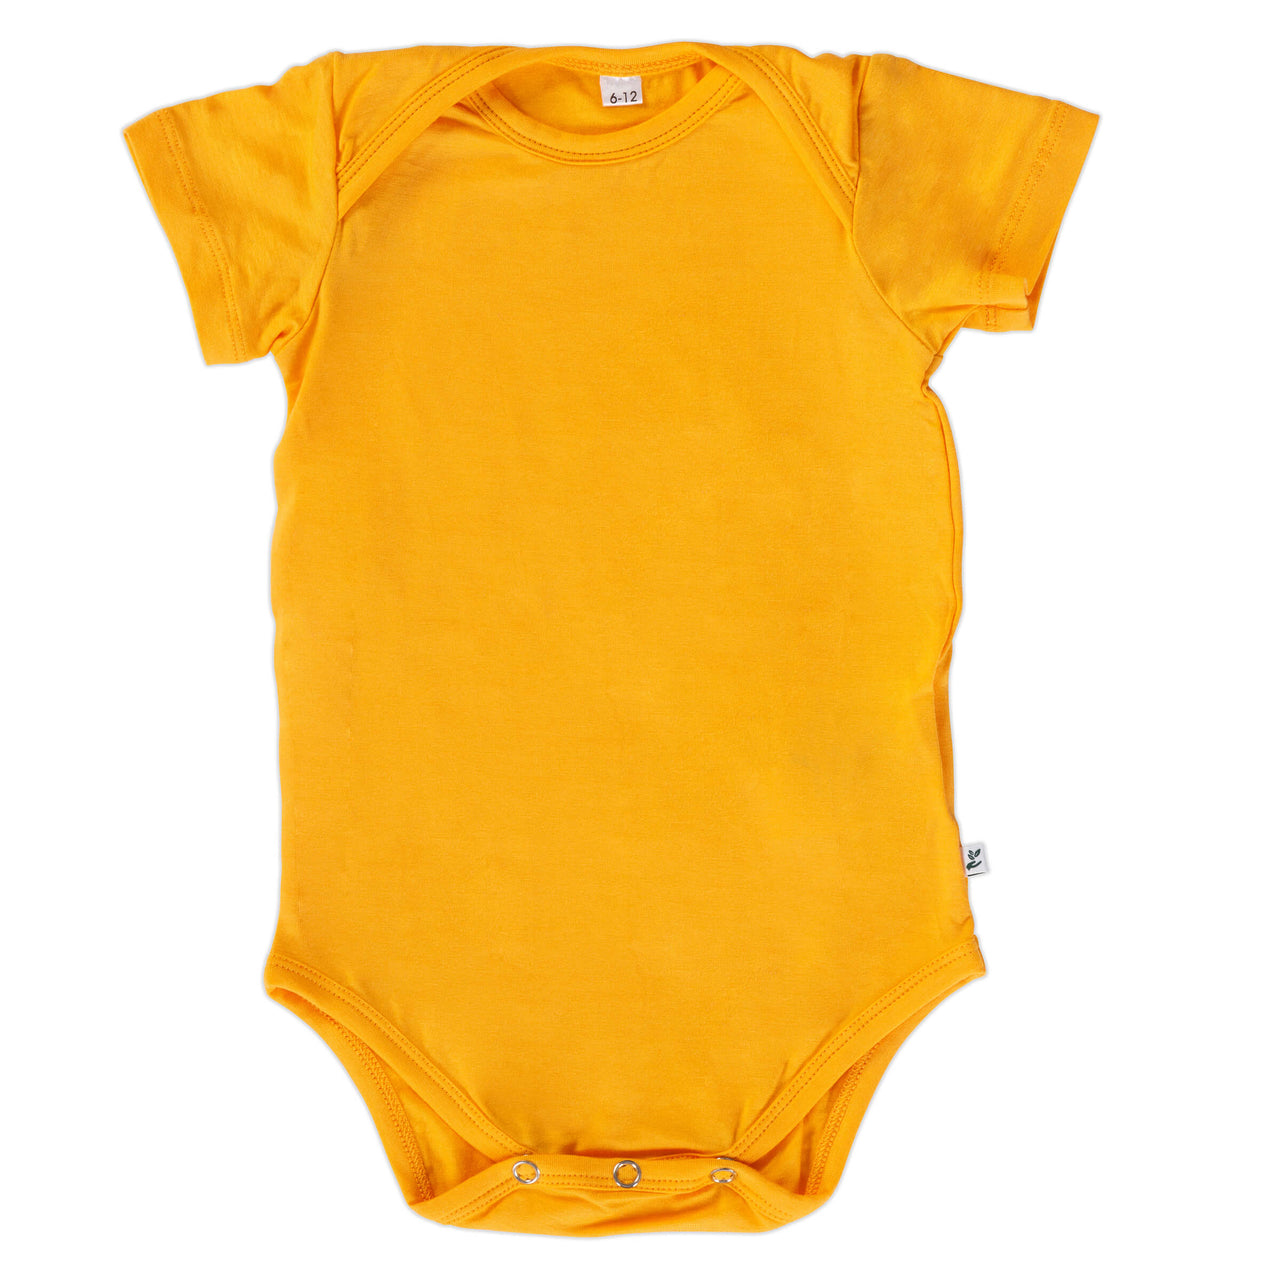 Baby Sleepwear – OUR BABY SPACE